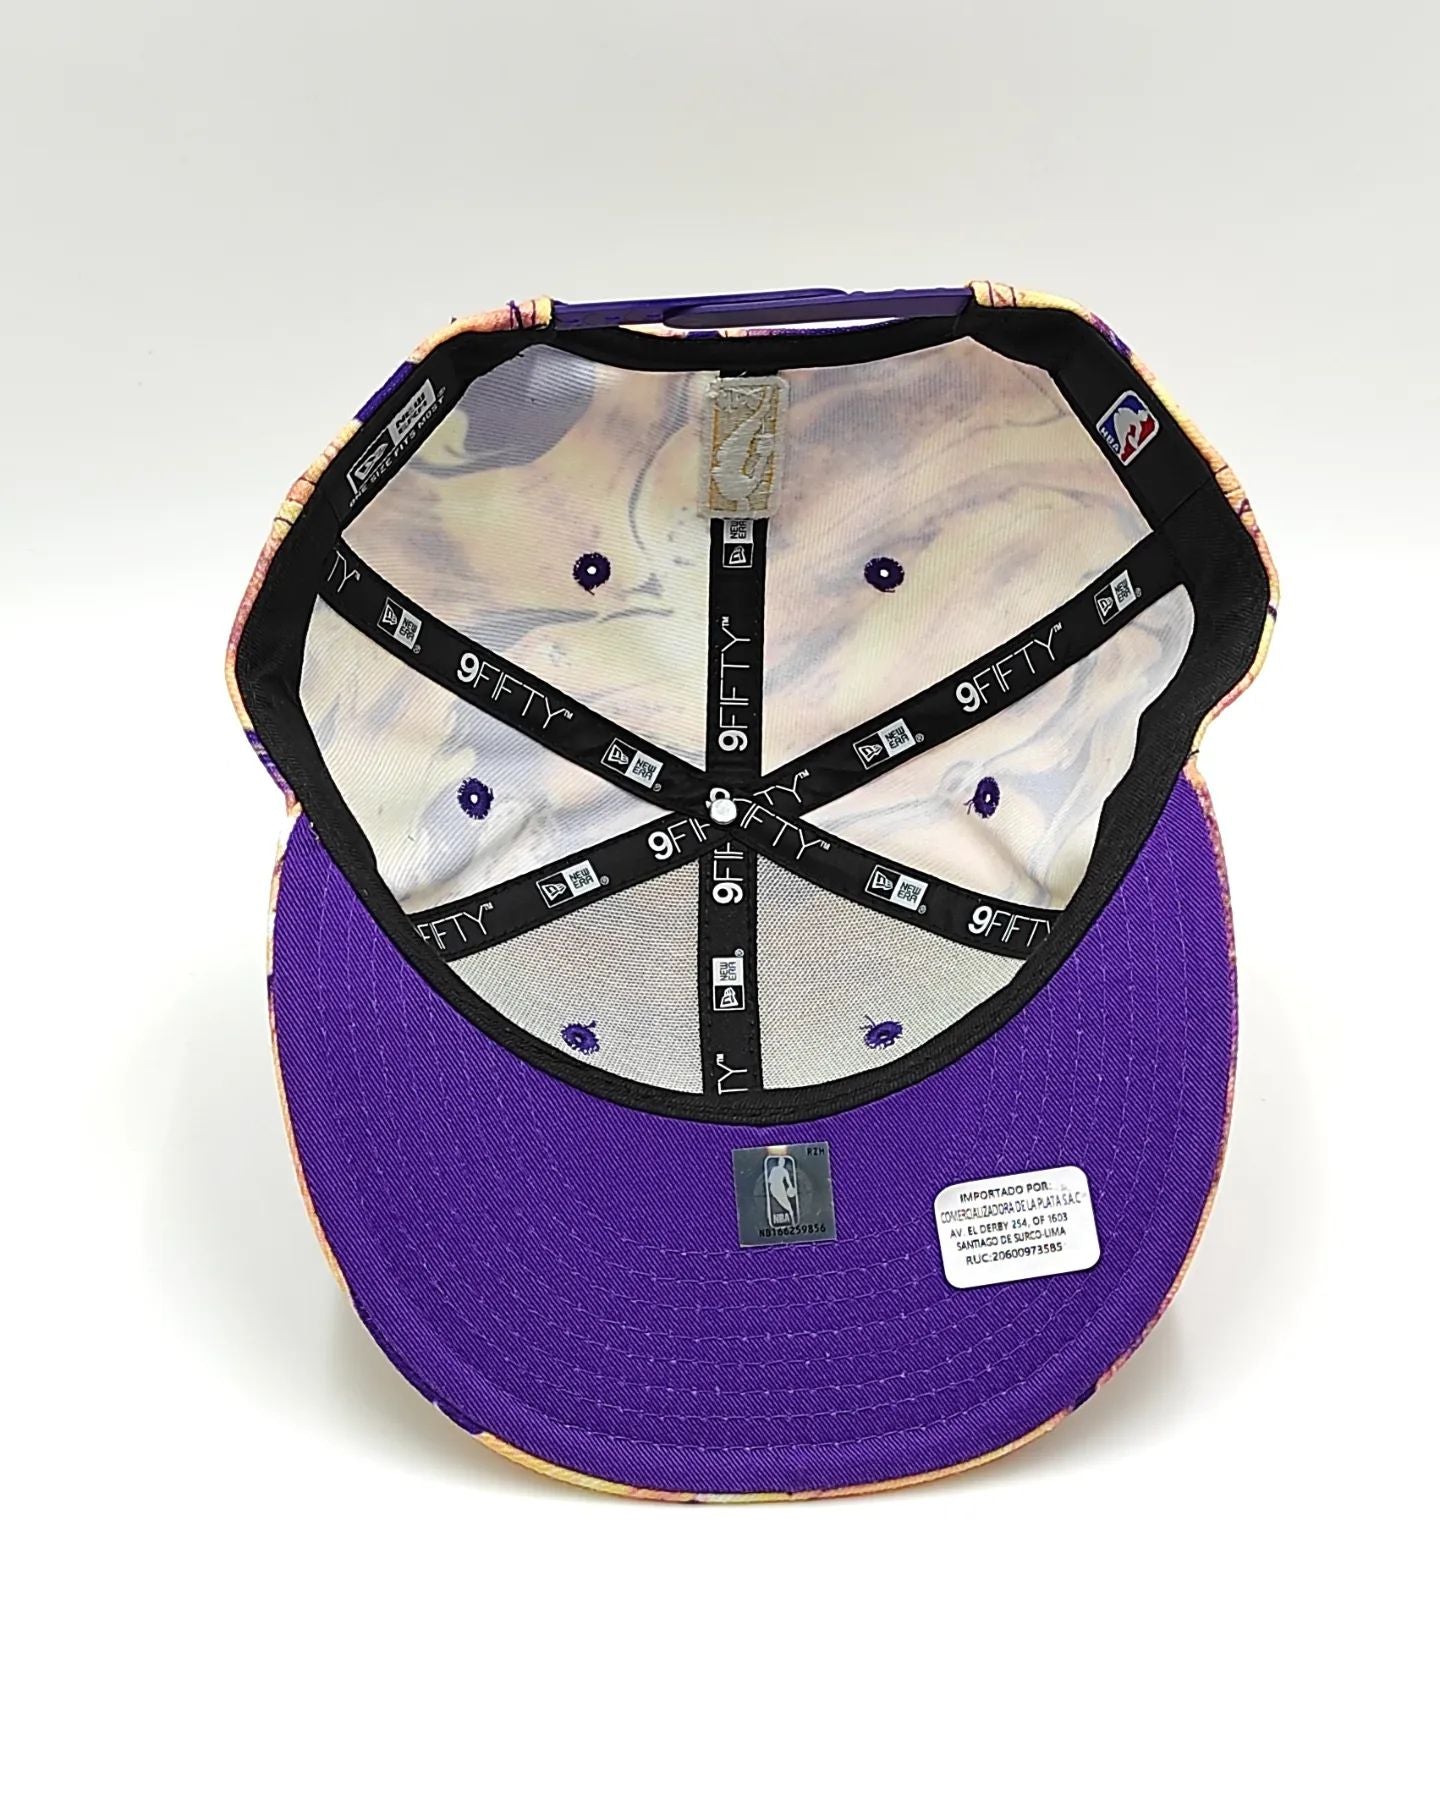 GORRA NEW ERA LOS ANGELES LAKERS 9FIFTY SNAP COLORS